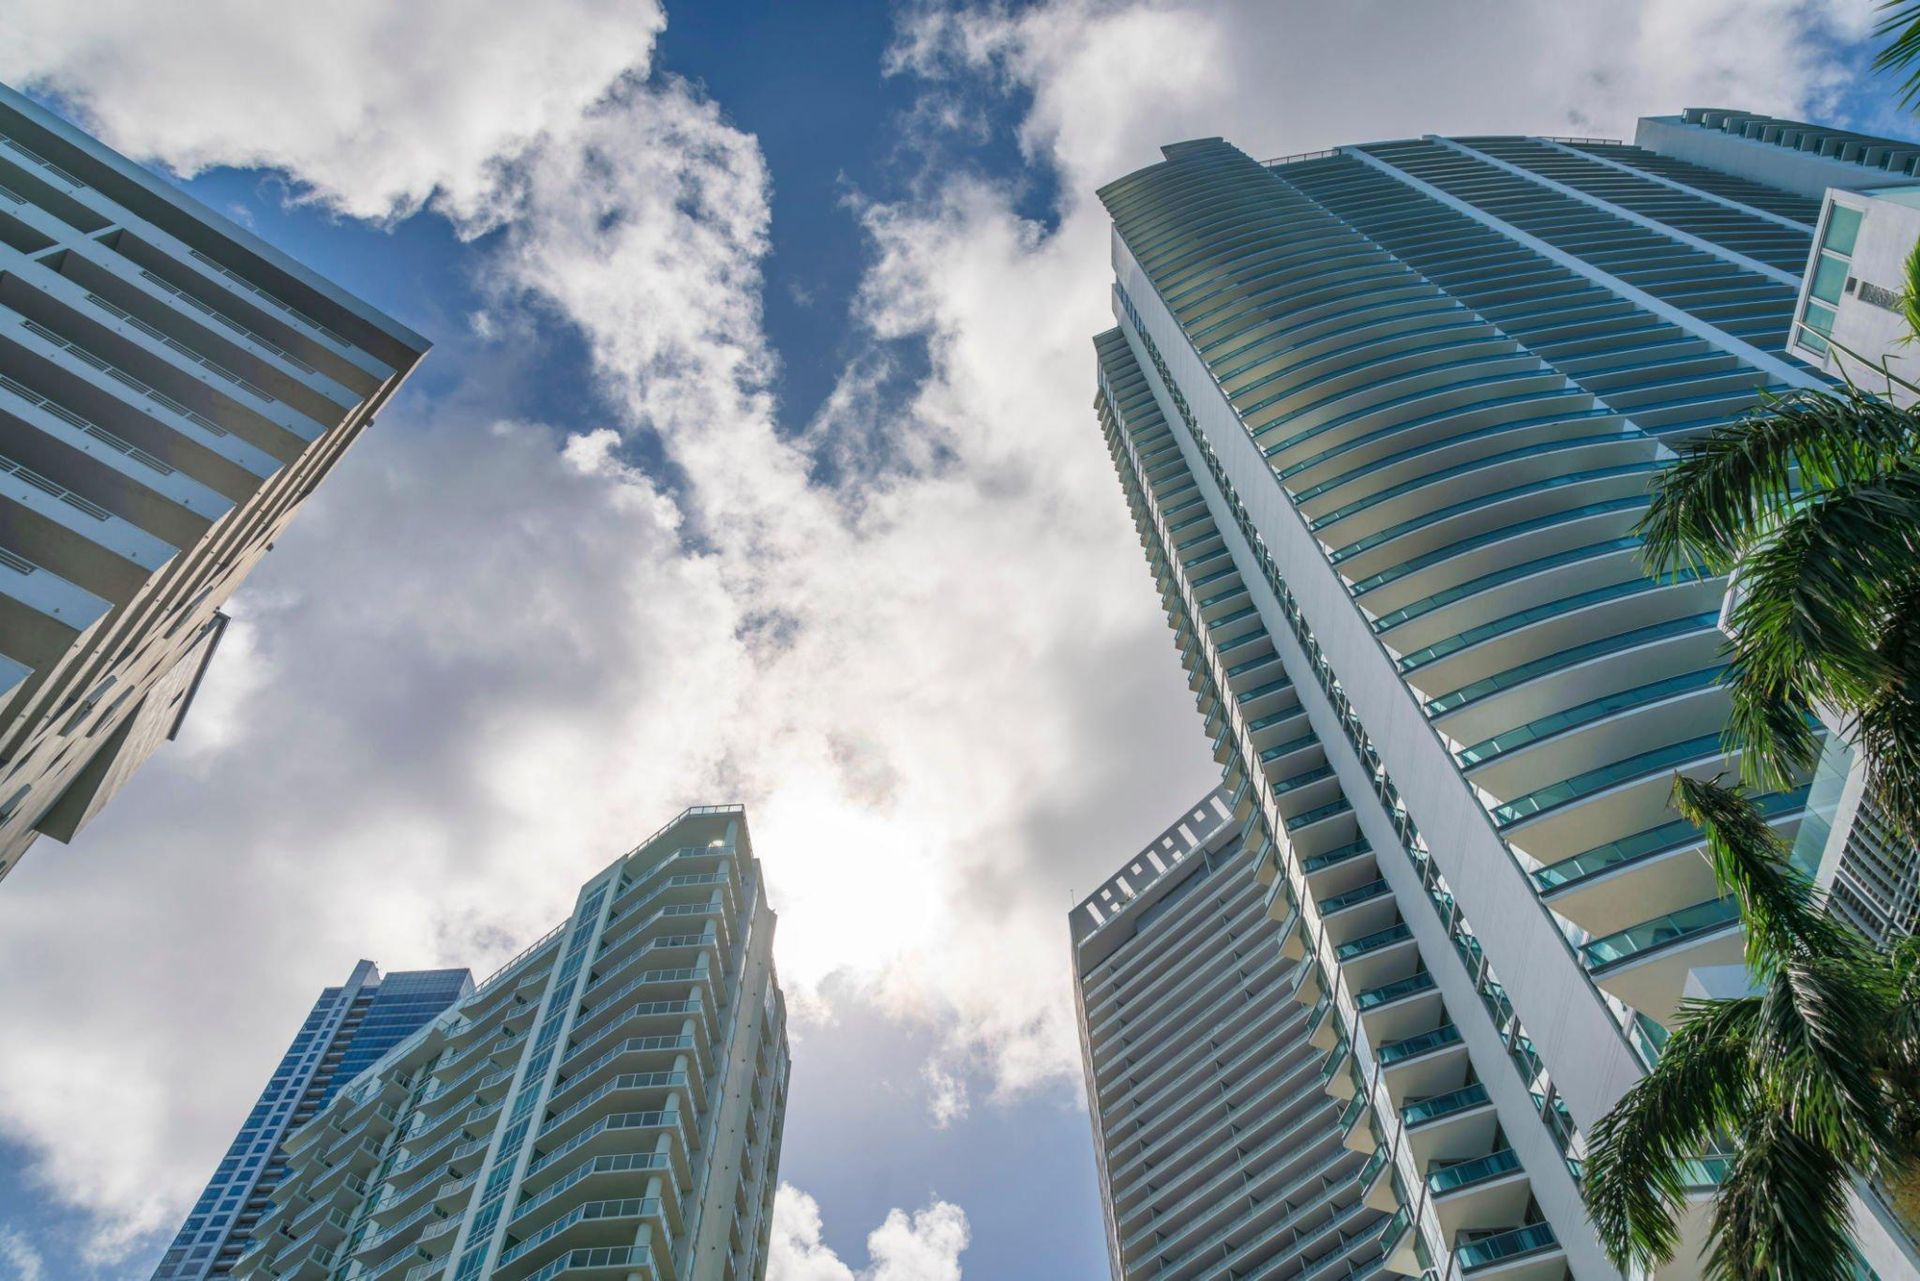 low angle view of condominium buildings with clouds covering the sky above at miami